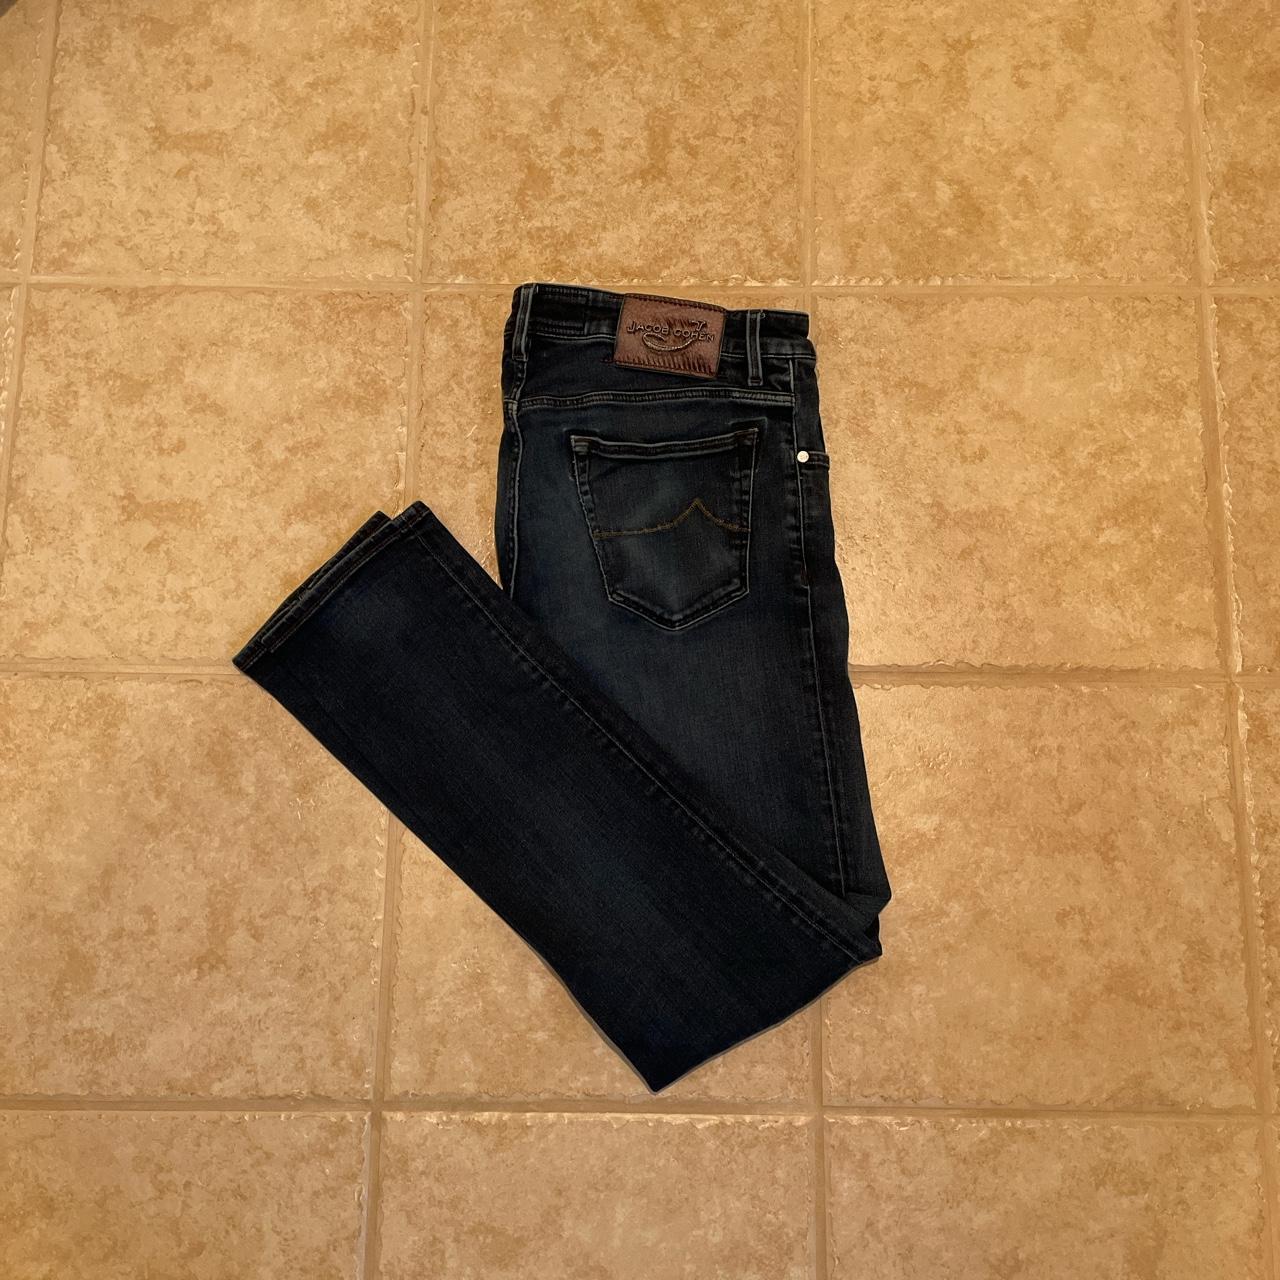 Product Image 1 - Jacob Cohen Tailored Denim Jeans

Retailed